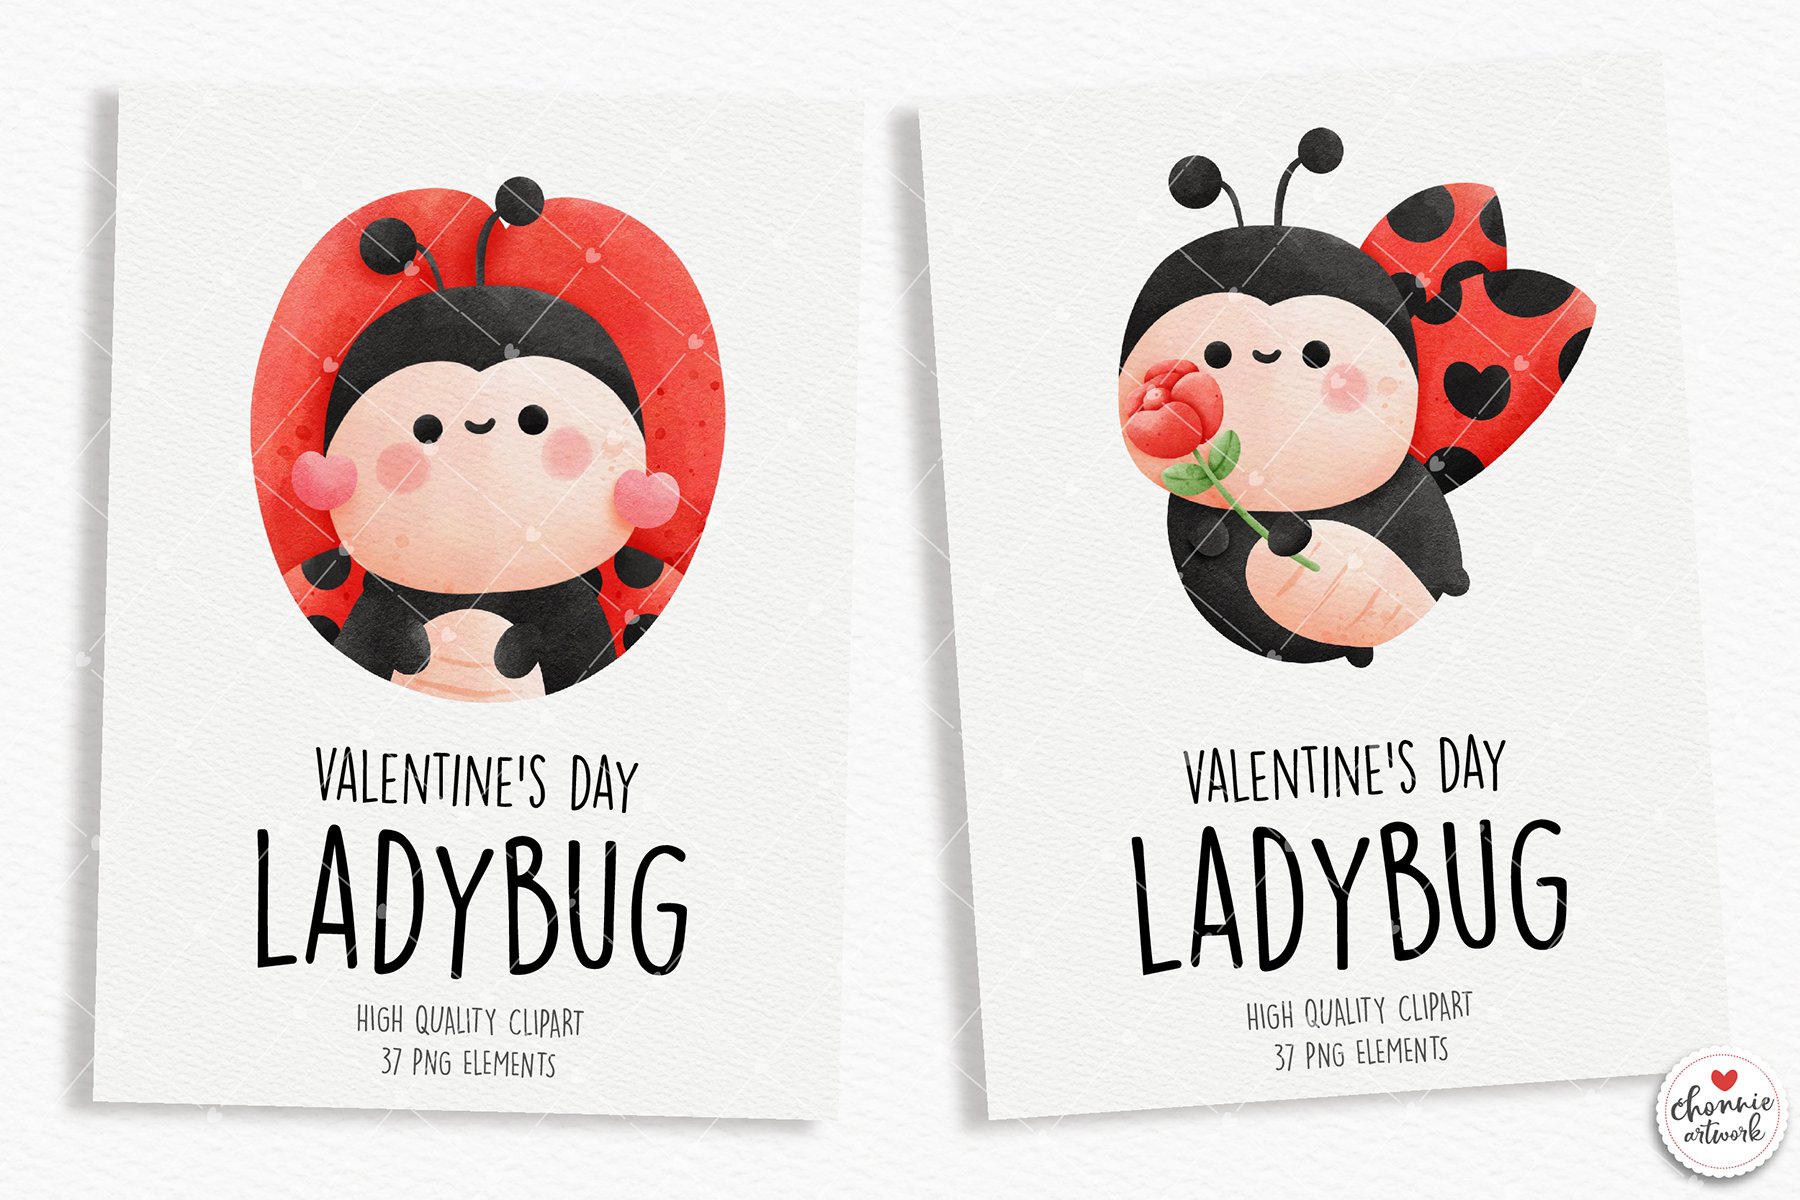 Valentine's day ladybug clipart preview image.